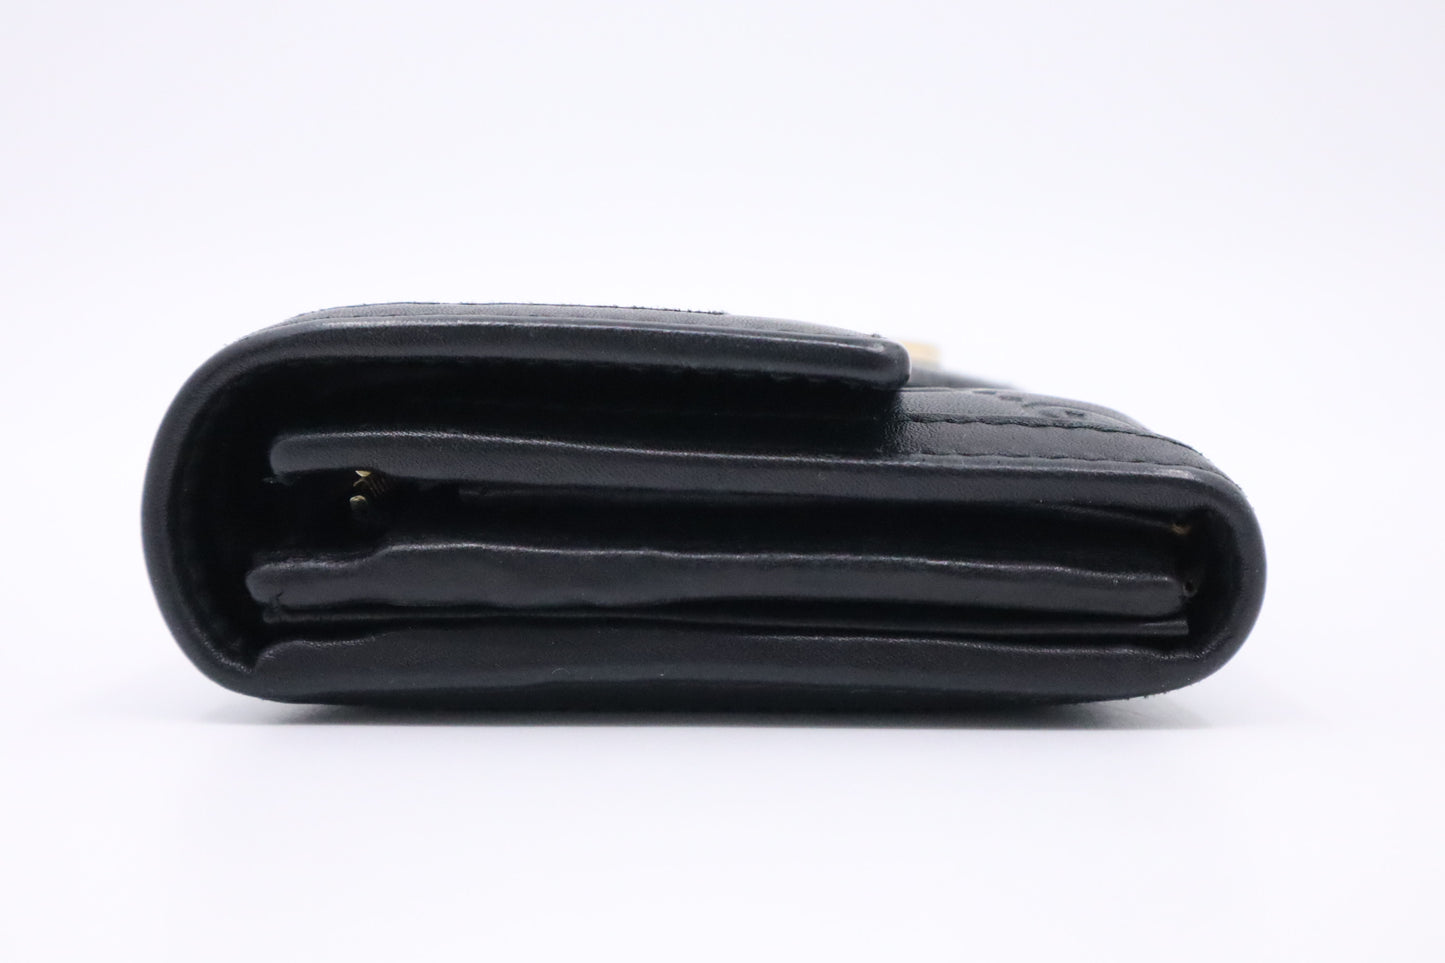 Gucci Continental Wallet in Black Guccissima Leather